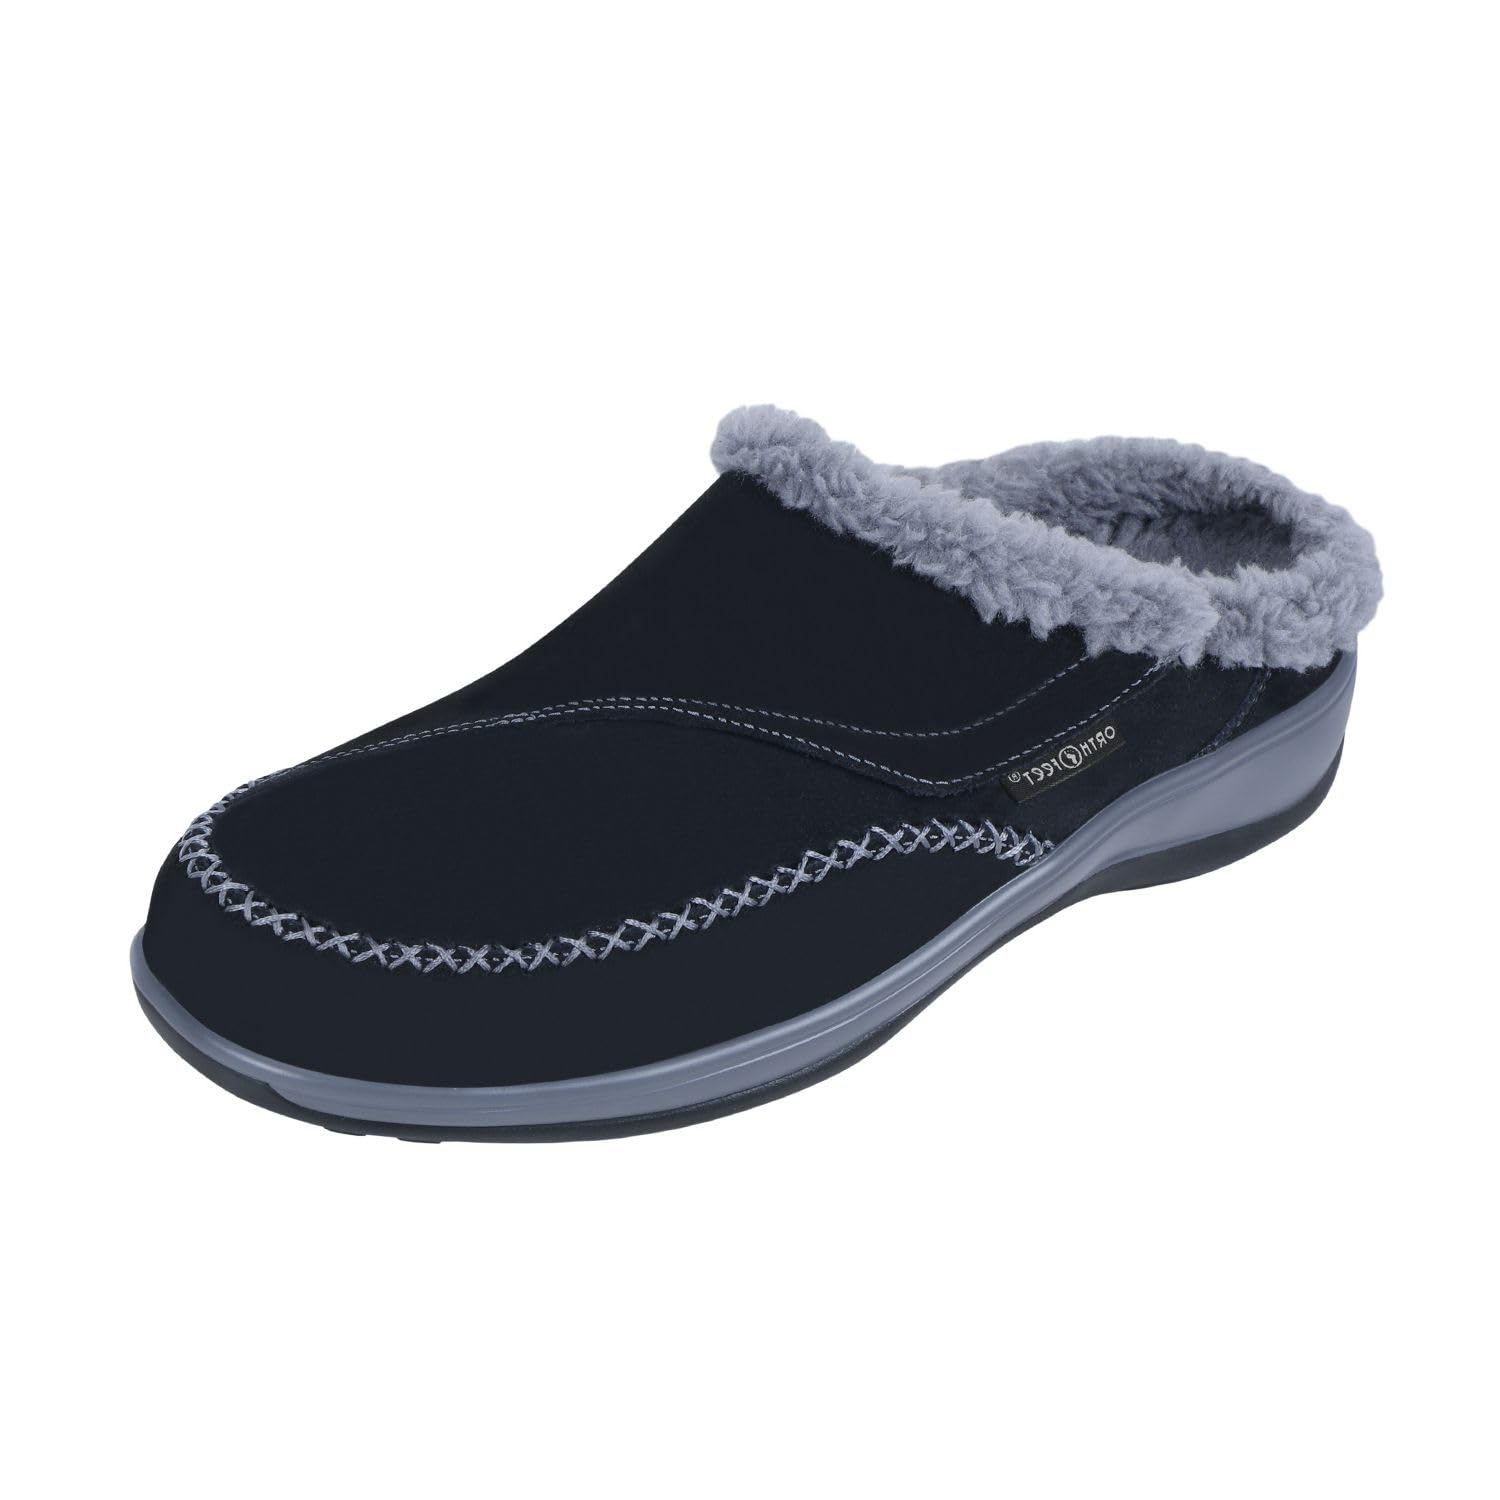 Orthofeet Innovative Orthopedic Slippers for Women - Ideal for Plantar Fasciitis, Foot & Heel Pain Relief. Arch Support Slippers